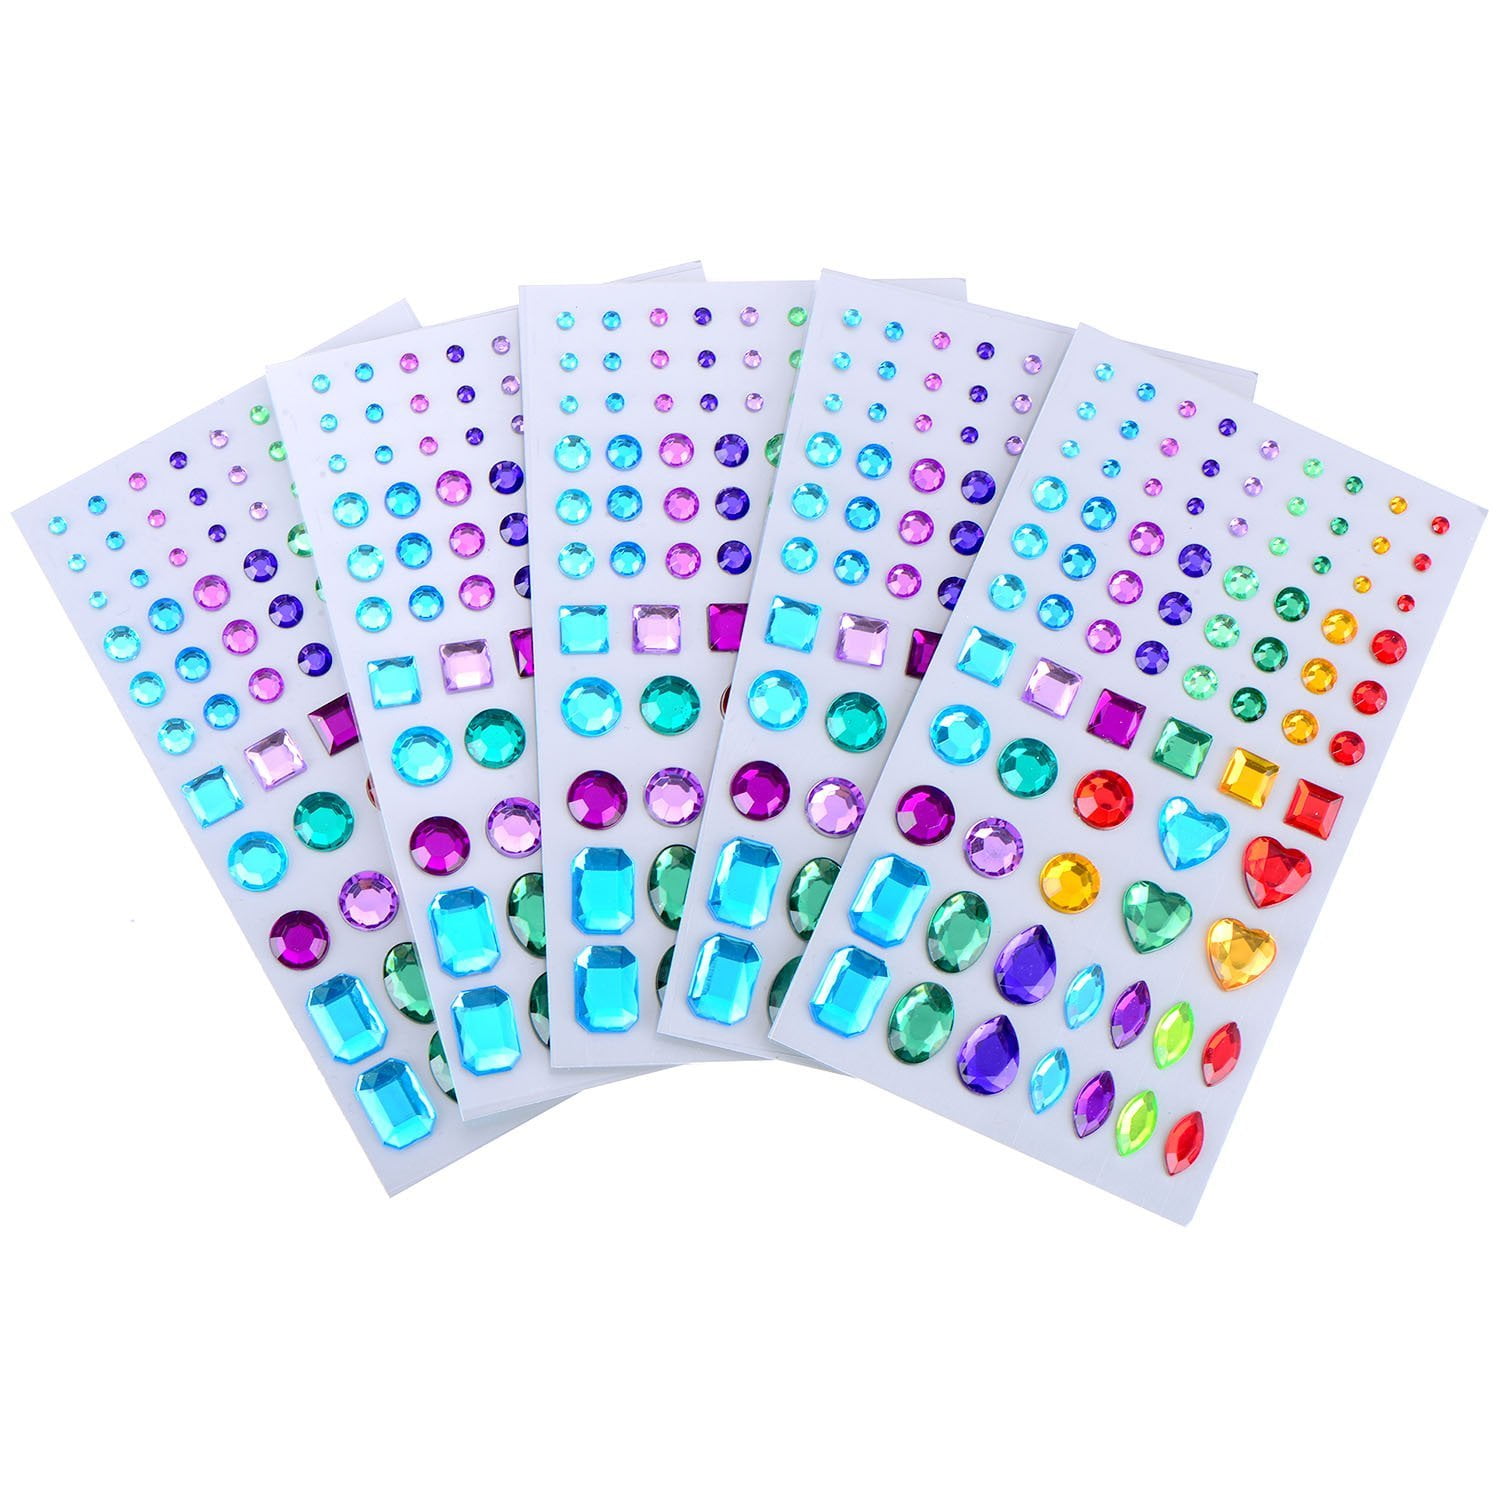 Extra Large 3D Jewel Stickers Self Adhesive 2 50mm Pack of 2 PCS 14 Colors  